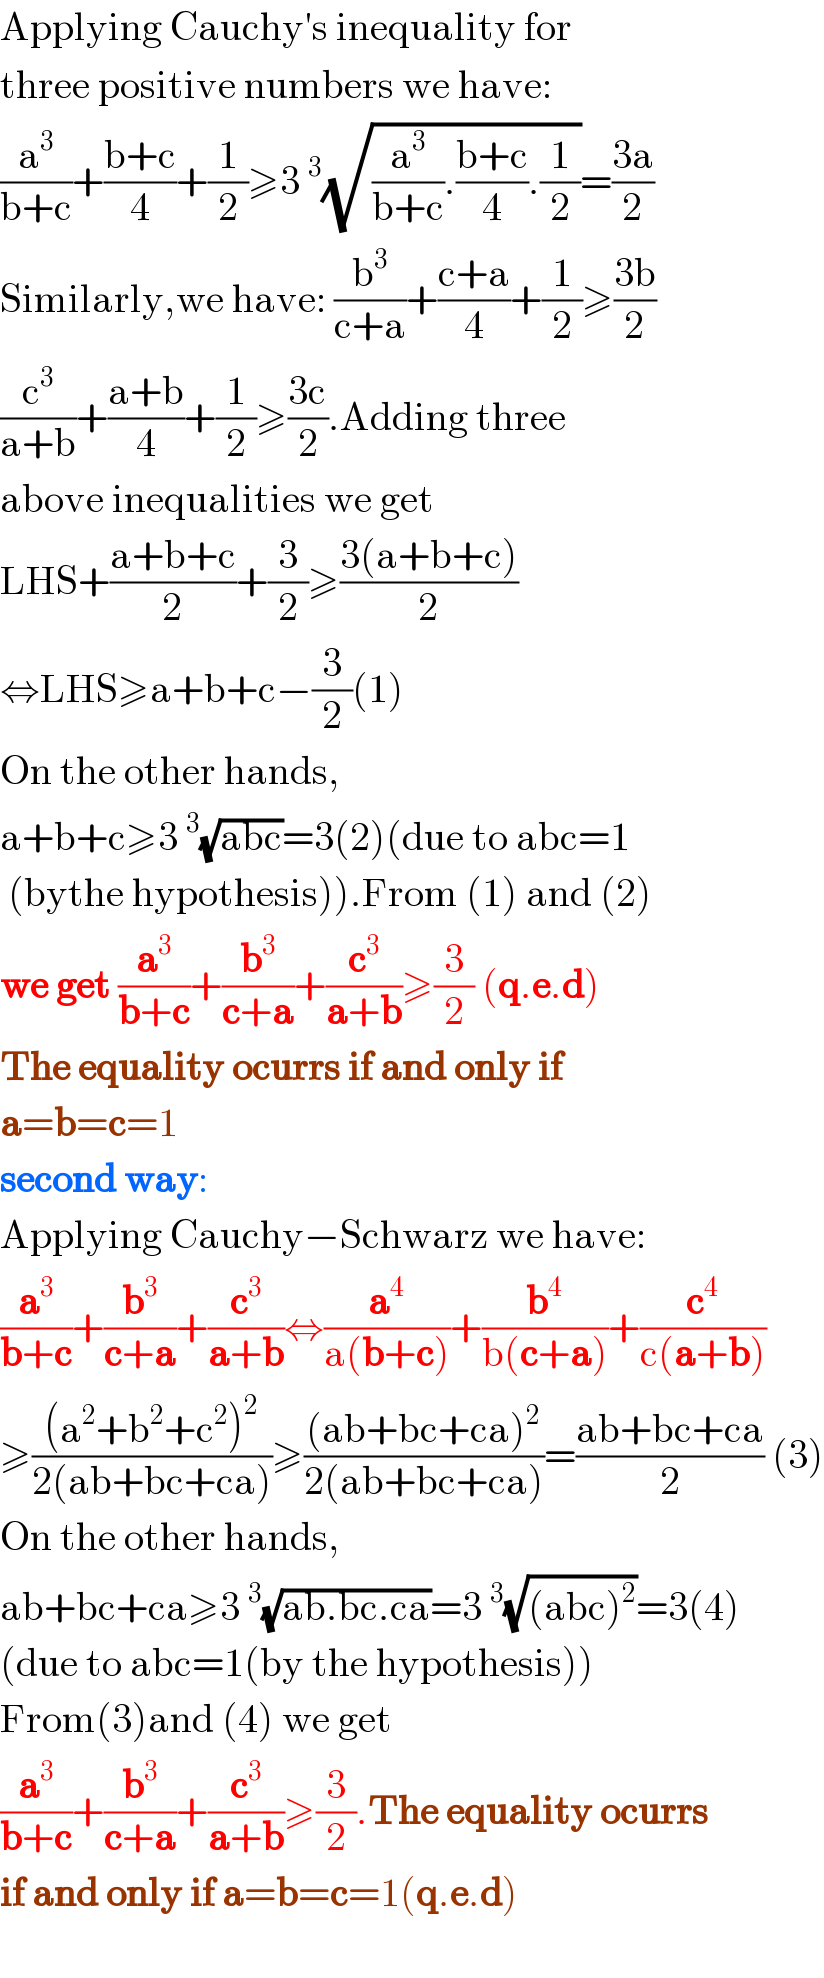 Applying Cauchy′s inequality for   three positive numbers we have:  (a^3 /(b+c))+((b+c)/4)+(1/2)≥3 ^3 (√((a^3 /(b+c)).((b+c)/4).(1/2)))=((3a)/2)  Similarly,we have: (b^3 /(c+a))+((c+a)/4)+(1/2)≥((3b)/2)  (c^3 /(a+b))+((a+b)/4)+(1/2)≥((3c)/2).Adding three  above inequalities we get  LHS+((a+b+c)/2)+(3/2)≥((3(a+b+c))/2)  ⇔LHS≥a+b+c−(3/2)(1)  On the other hands,  a+b+c≥3 ^3 (√(abc))=3(2)(due to abc=1   (bythe hypothesis)).From (1) and (2)  we get (a^3 /(b+c))+(b^3 /(c+a))+(c^3 /(a+b))≥(3/2) (q.e.d)  The equality ocurrs if and only if  a=b=c=1  second way:  Applying Cauchy−Schwarz we have:  (a^3 /(b+c))+(b^3 /(c+a))+(c^3 /(a+b))⇔(a^4 /(a(b+c)))+(b^4 /(b(c+a)))+(c^4 /(c(a+b)))  ≥(((a^2 +b^2 +c^2 )^2 )/(2(ab+bc+ca)))≥(((ab+bc+ca)^2 )/(2(ab+bc+ca)))=((ab+bc+ca)/2) (3)  On the other hands,  ab+bc+ca≥3 ^3 (√(ab.bc.ca))=3 ^3 (√((abc)^2 ))=3(4)  (due to abc=1(by the hypothesis))  From(3)and (4) we get  (a^3 /(b+c))+(b^3 /(c+a))+(c^3 /(a+b))≥(3/2).The equality ocurrs  if and only if a=b=c=1(q.e.d)    